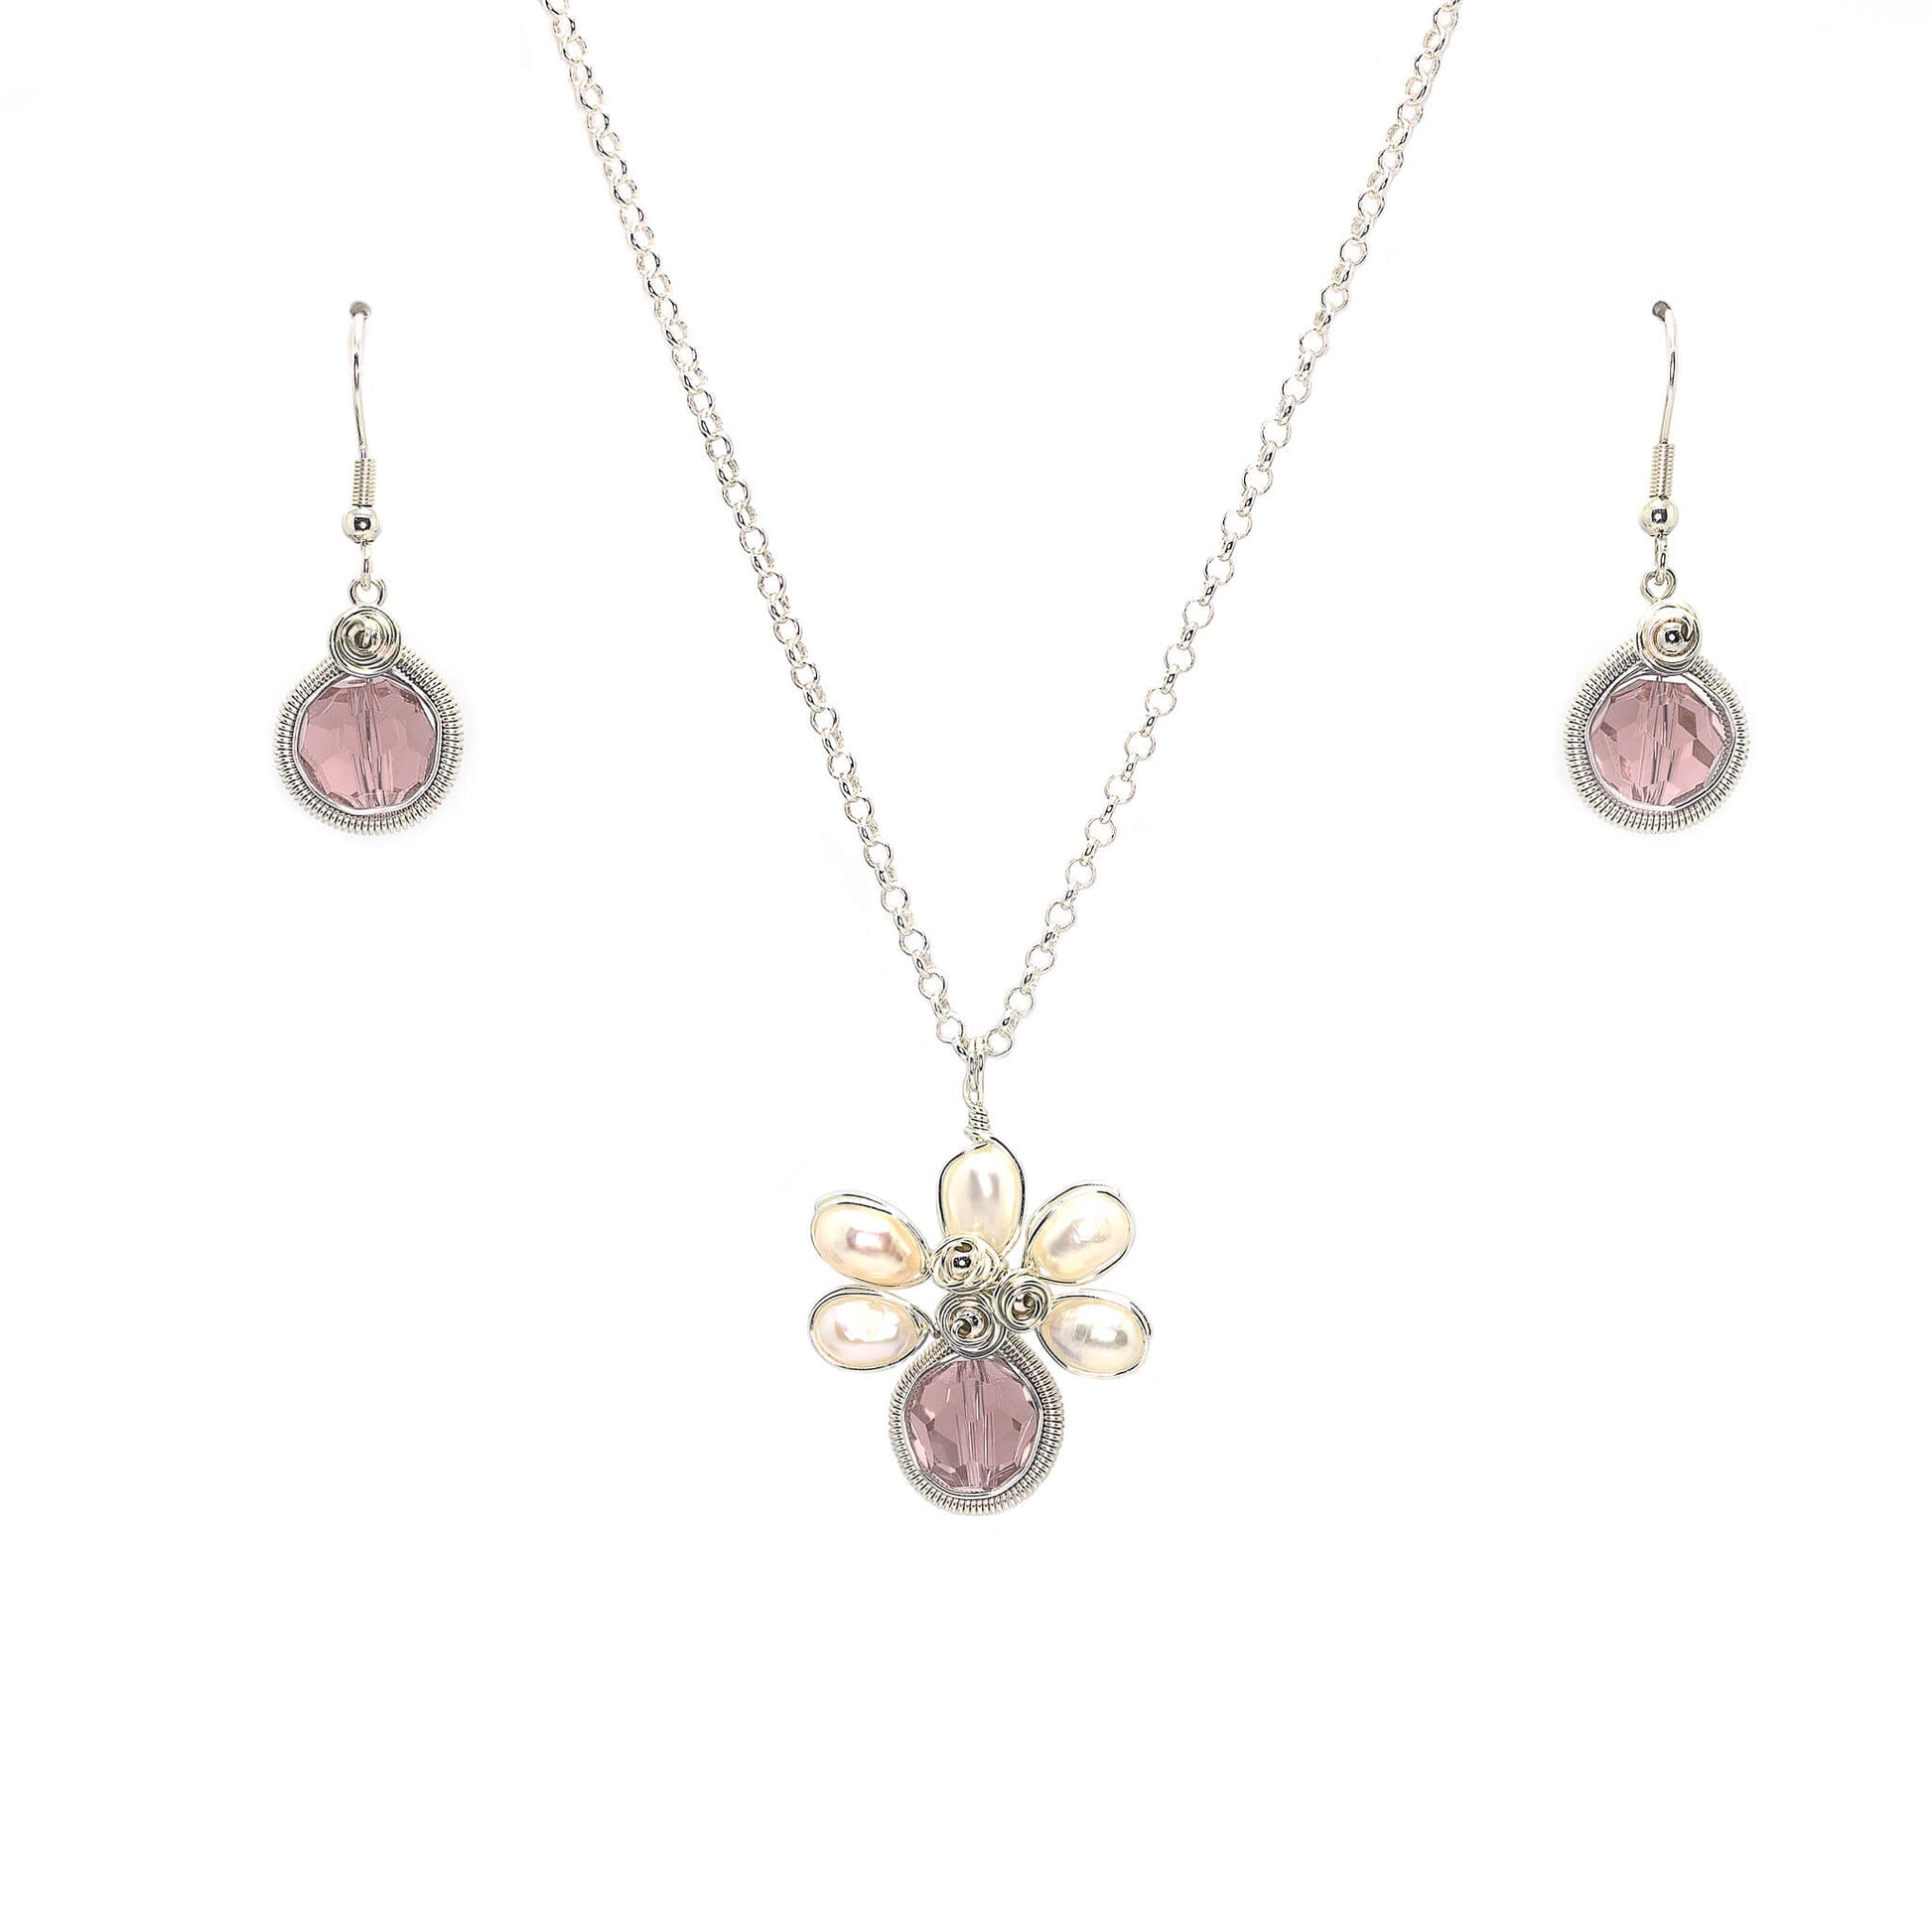 October Birthstone Crystal Necklace.-Earrings Set. Pink Crystals, Fresh Water Pearls  and Silver Set. 9.25 Sterling Silver Chain. 